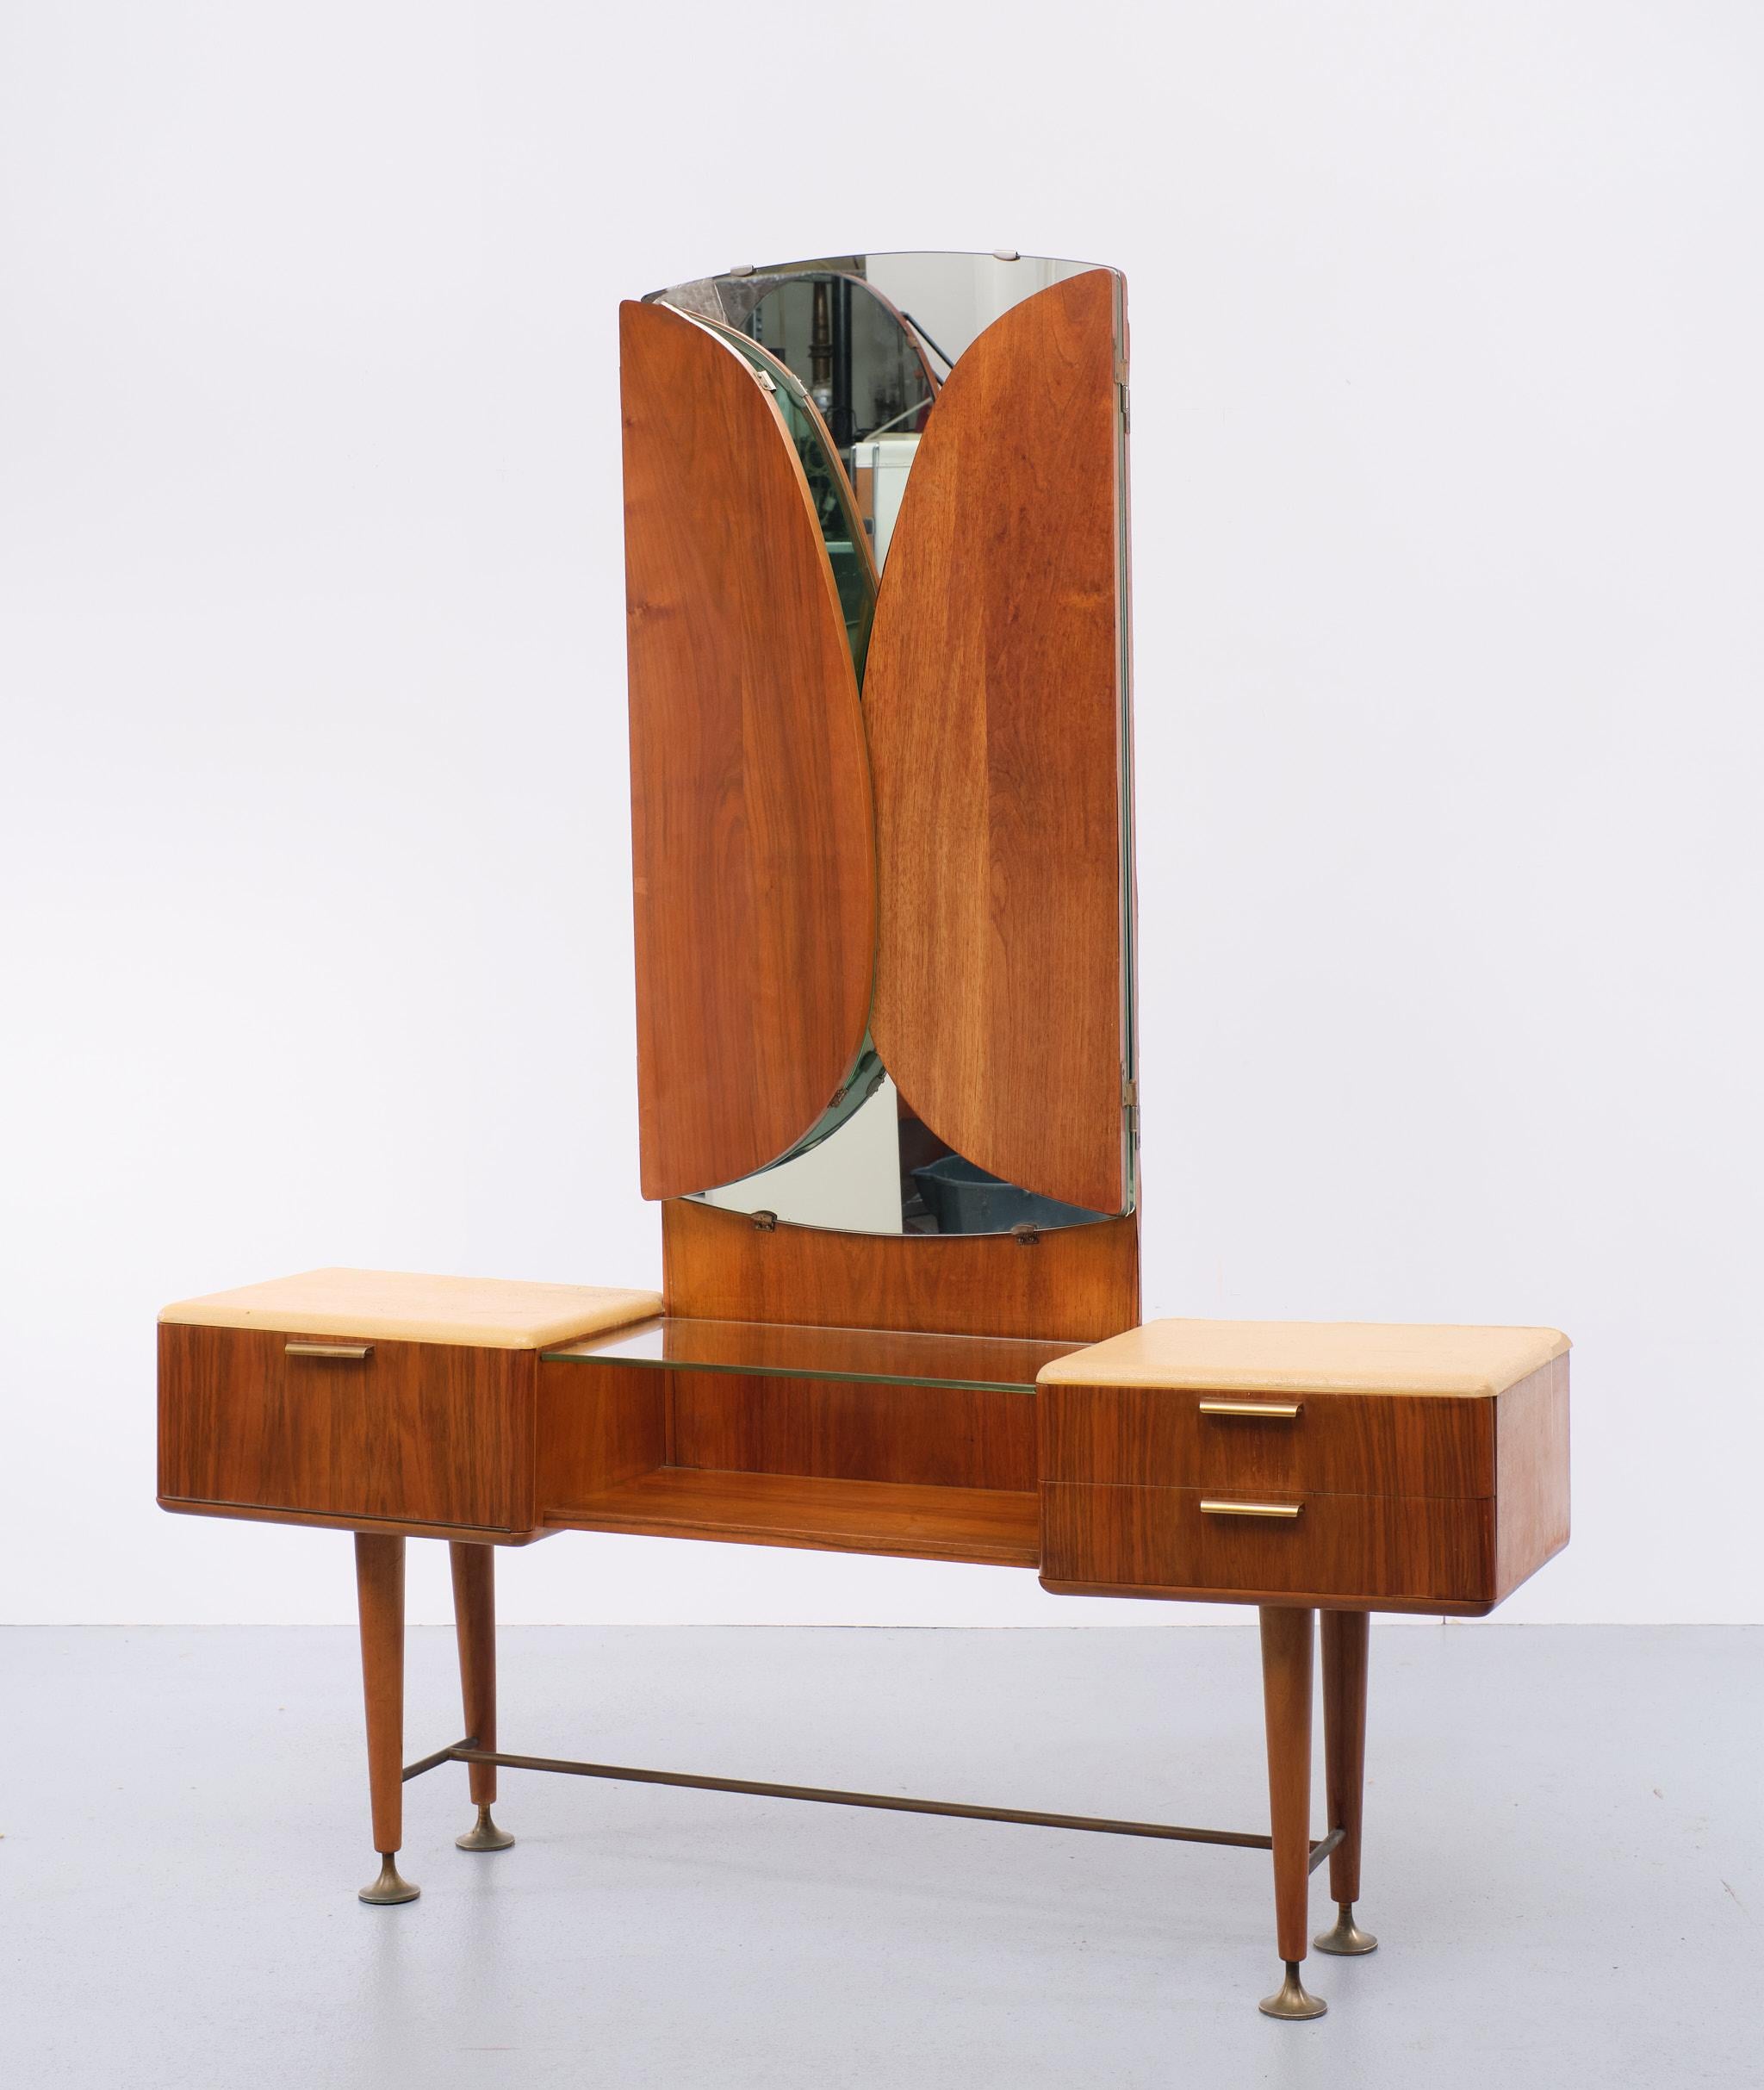 Nutwood Abraham A Patijn Dressing Table 1950s Dutch